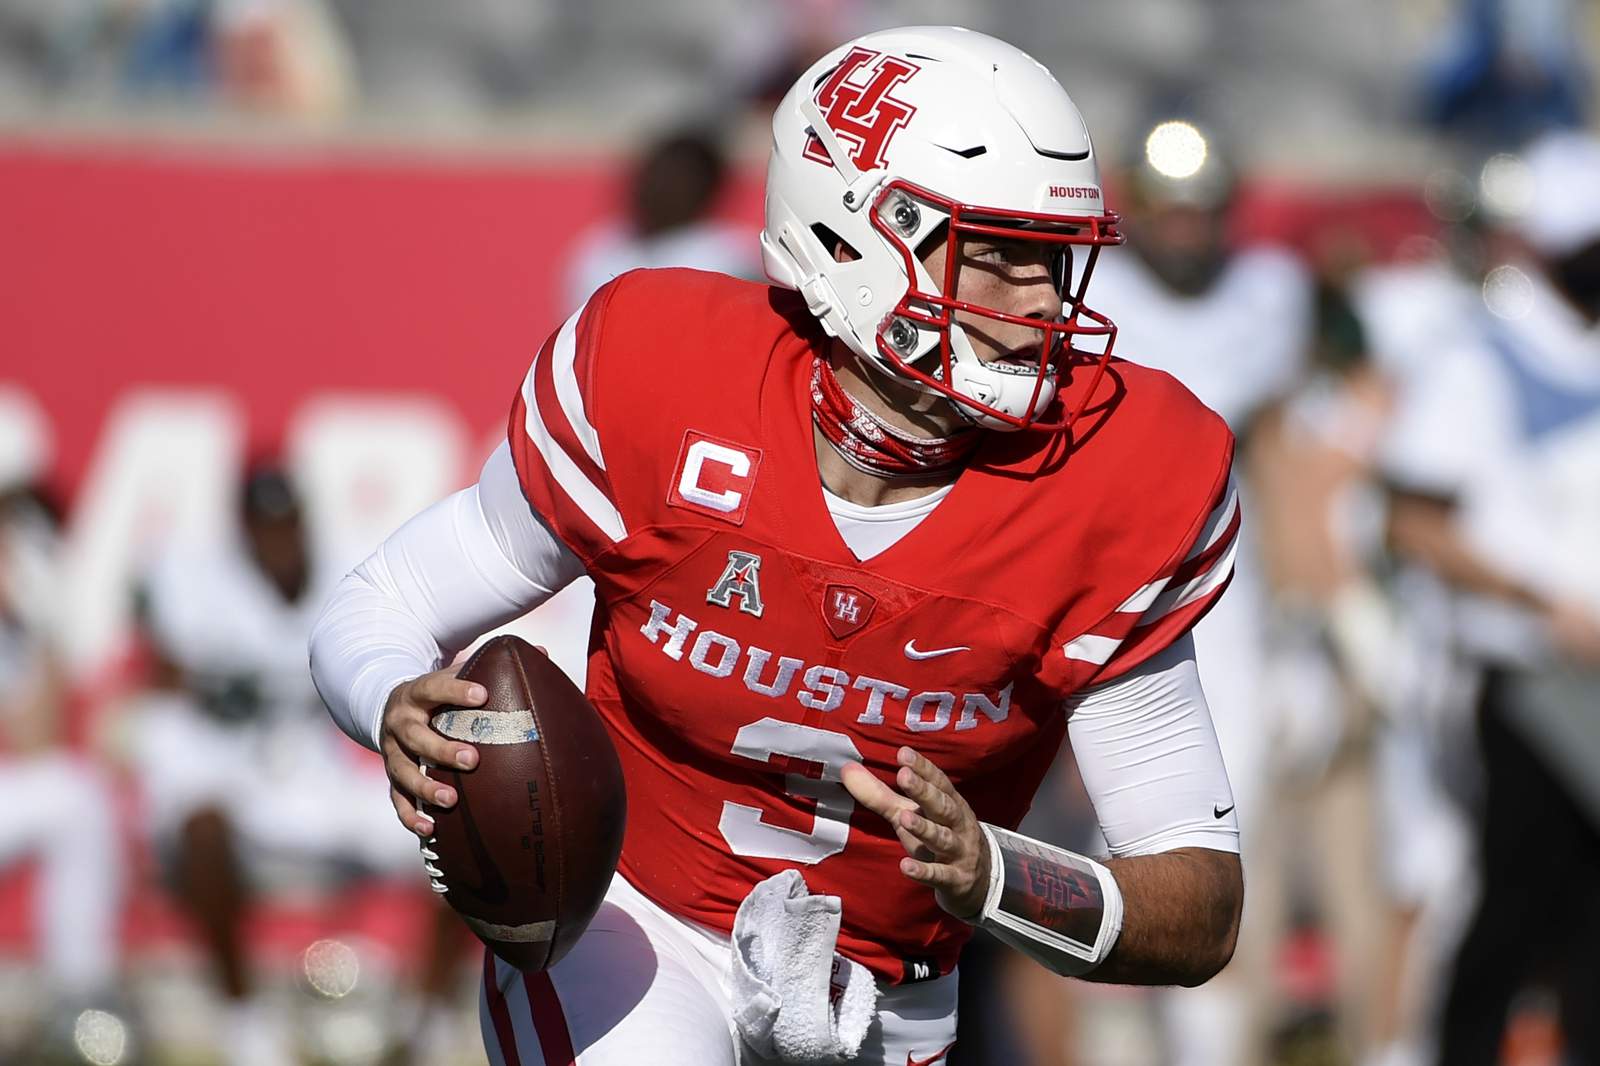 Tune, Houston hit high note in 56-21 blowout over S. Florida